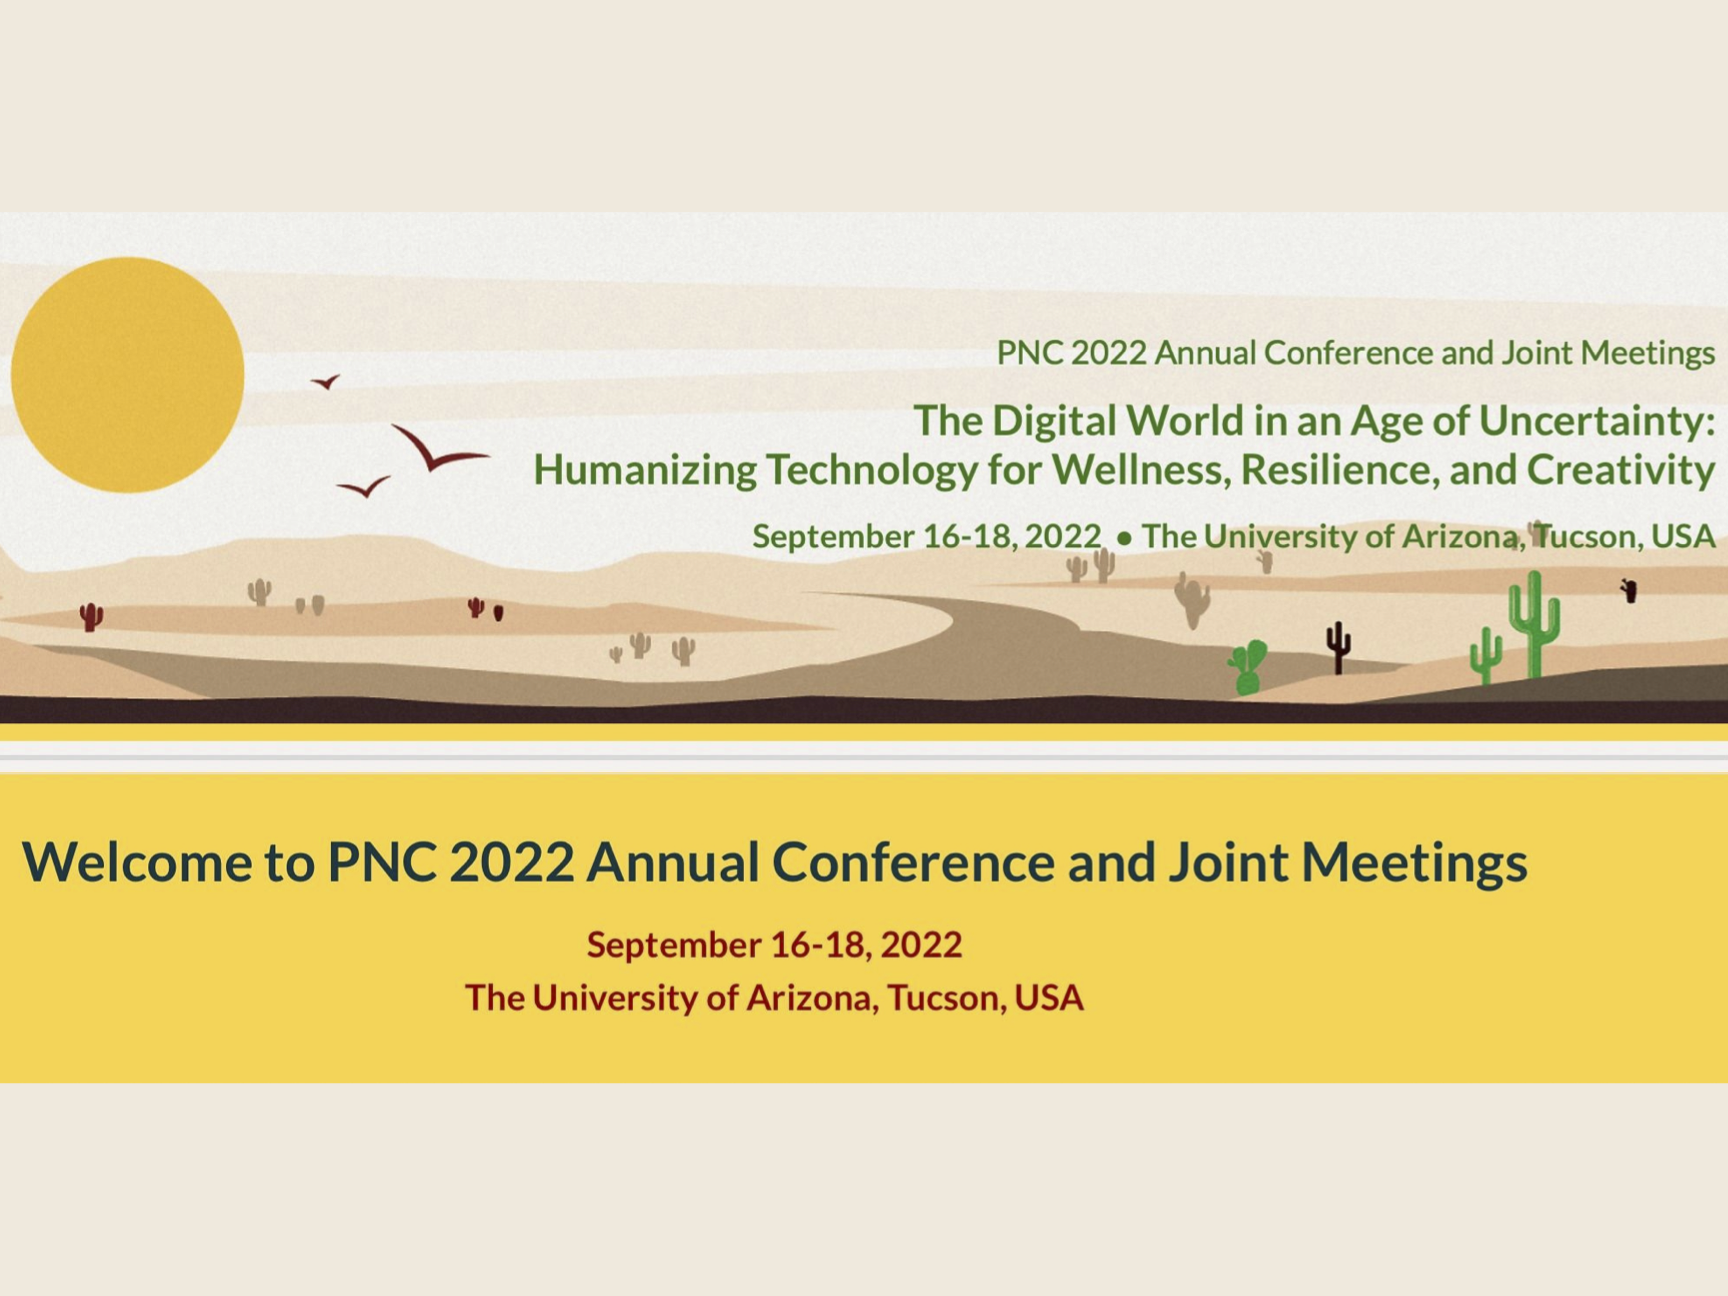 [Call for Participation] PNC 2022 Annual Conference and Joint Meetings